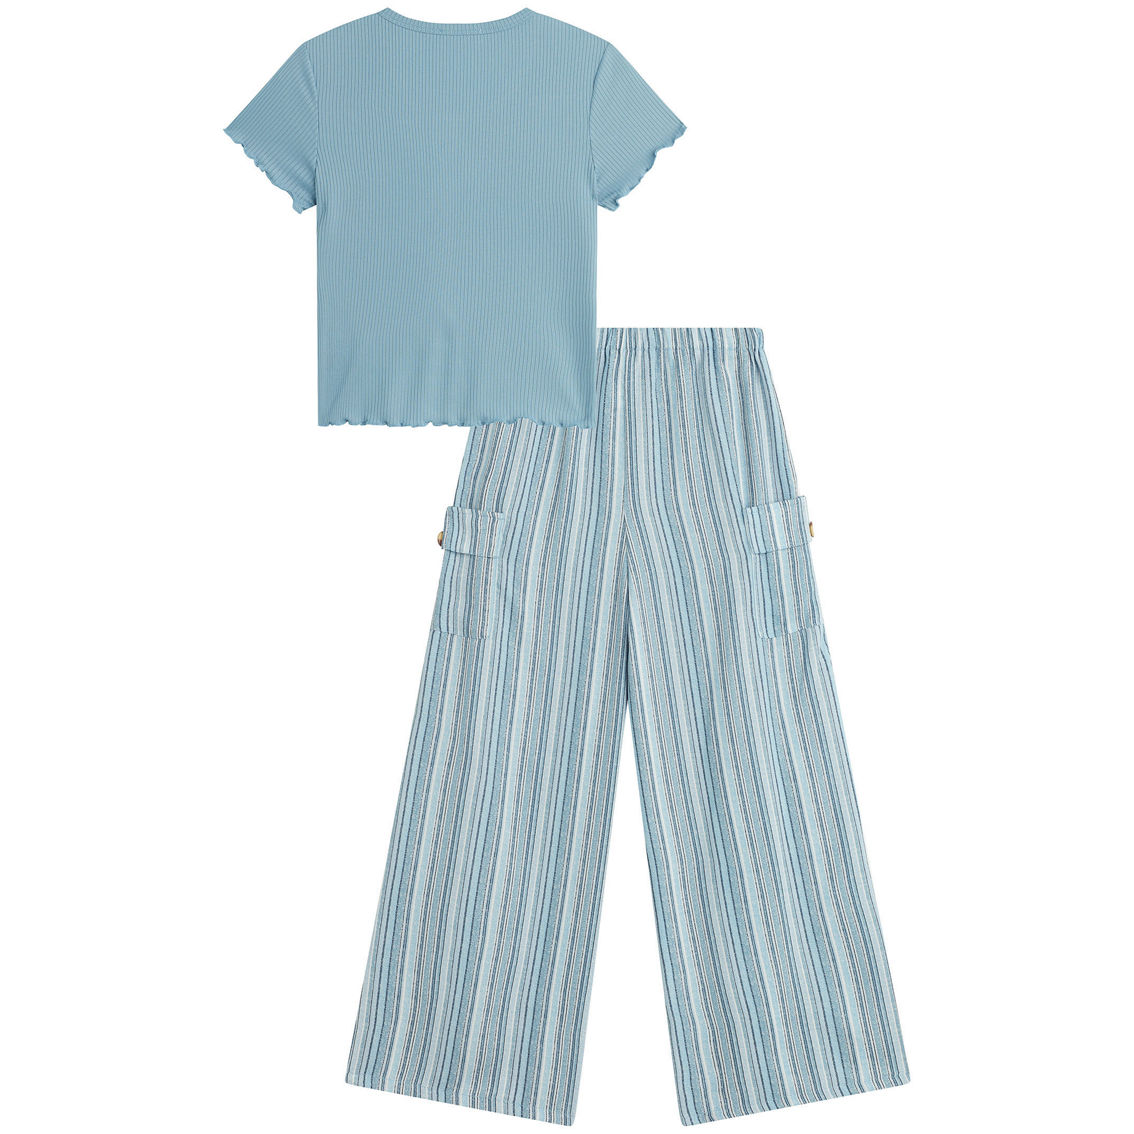 Beautees Girls Top and Pants 2 pc. Set - Image 2 of 2